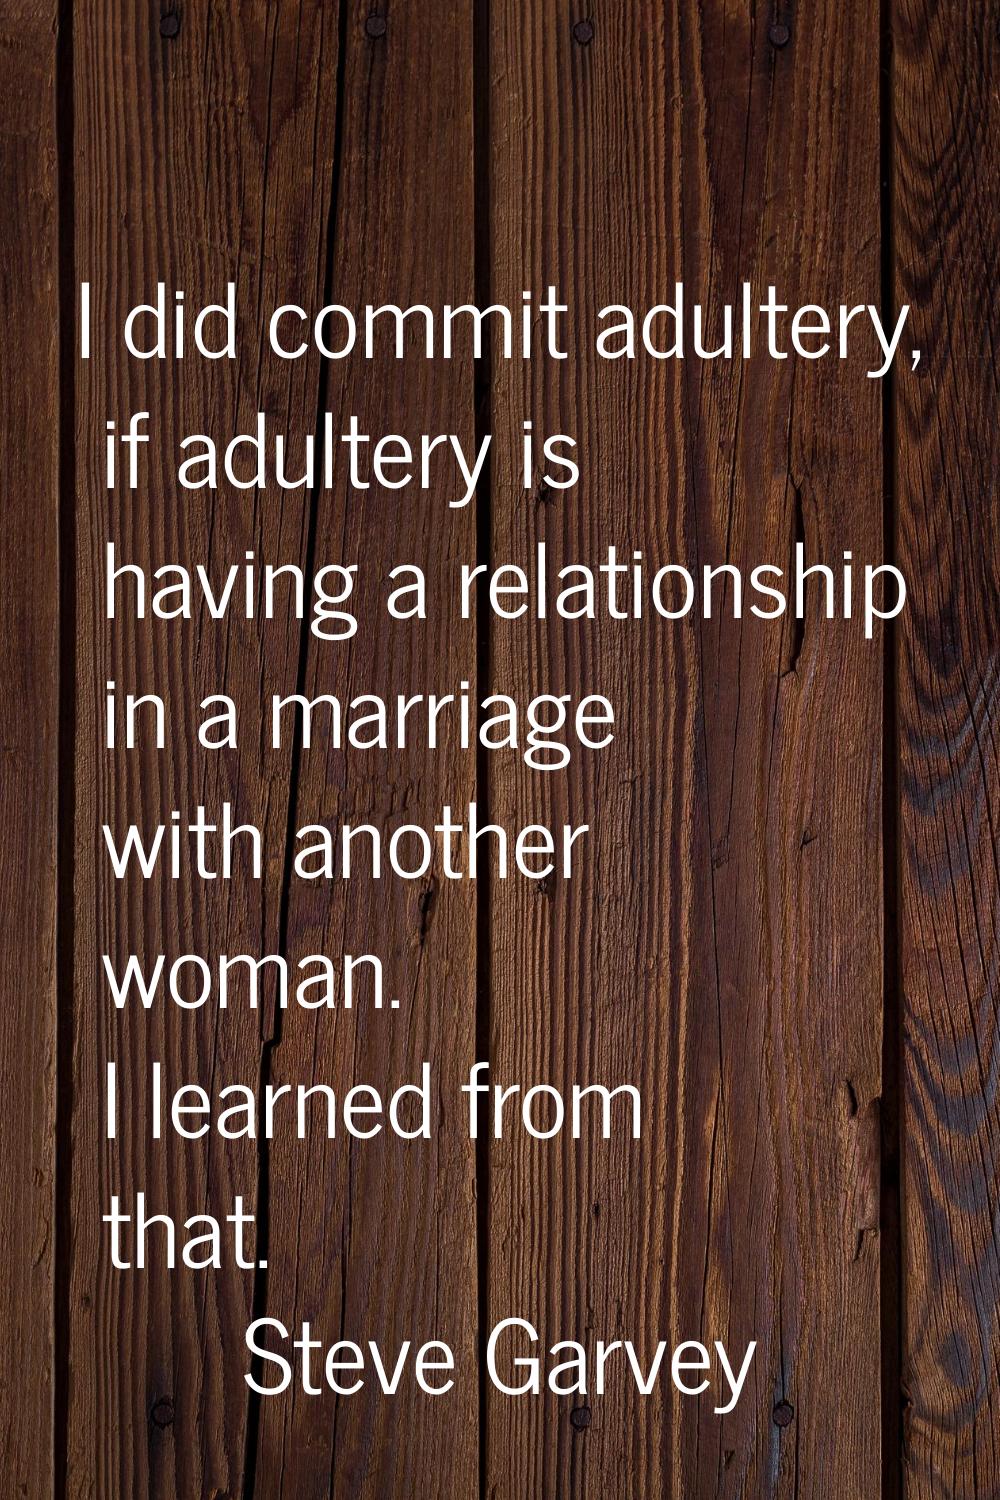 I did commit adultery, if adultery is having a relationship in a marriage with another woman. I lea